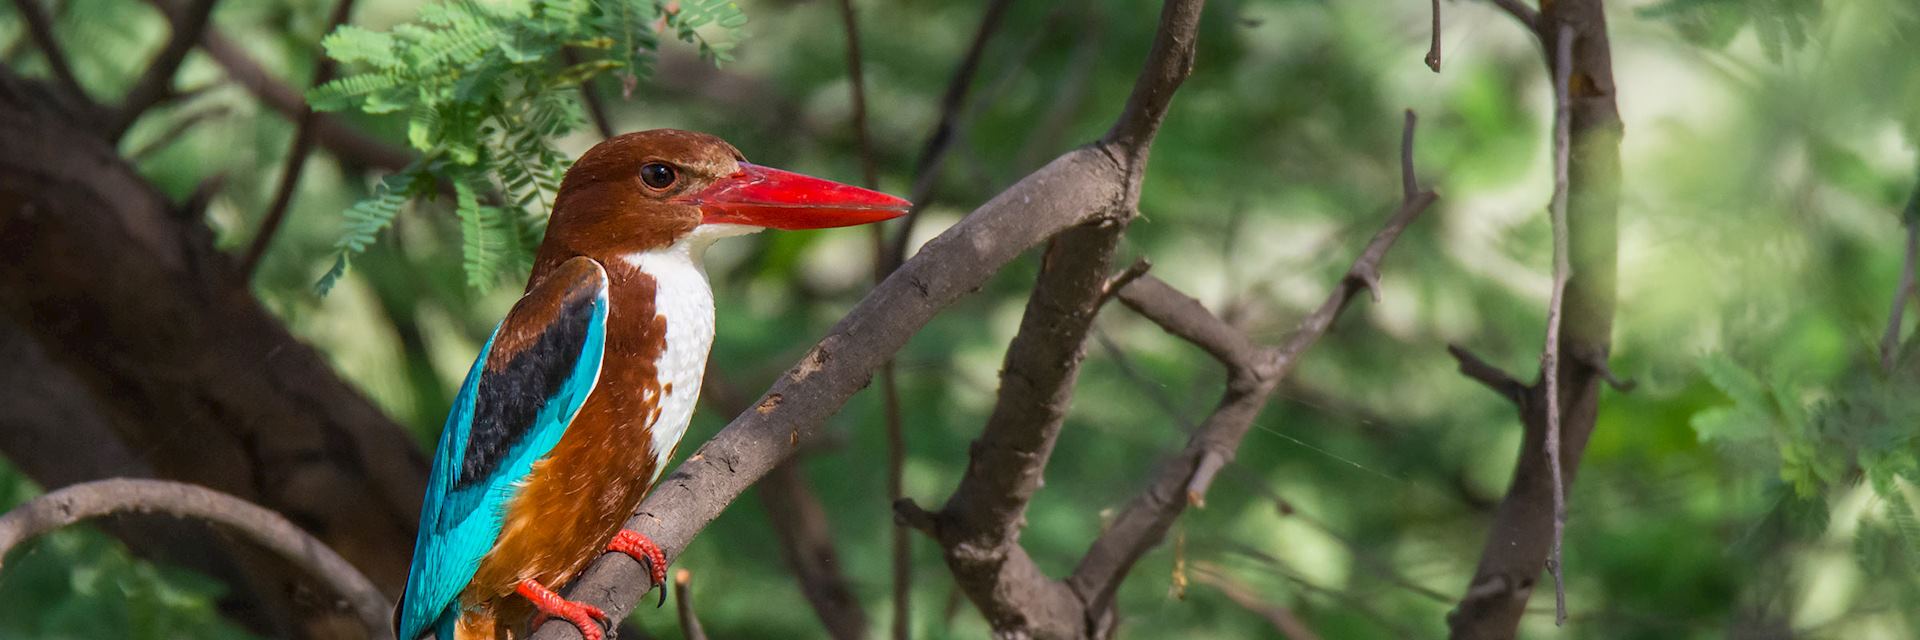 White-throated kingfisher in Keoladeo National Park